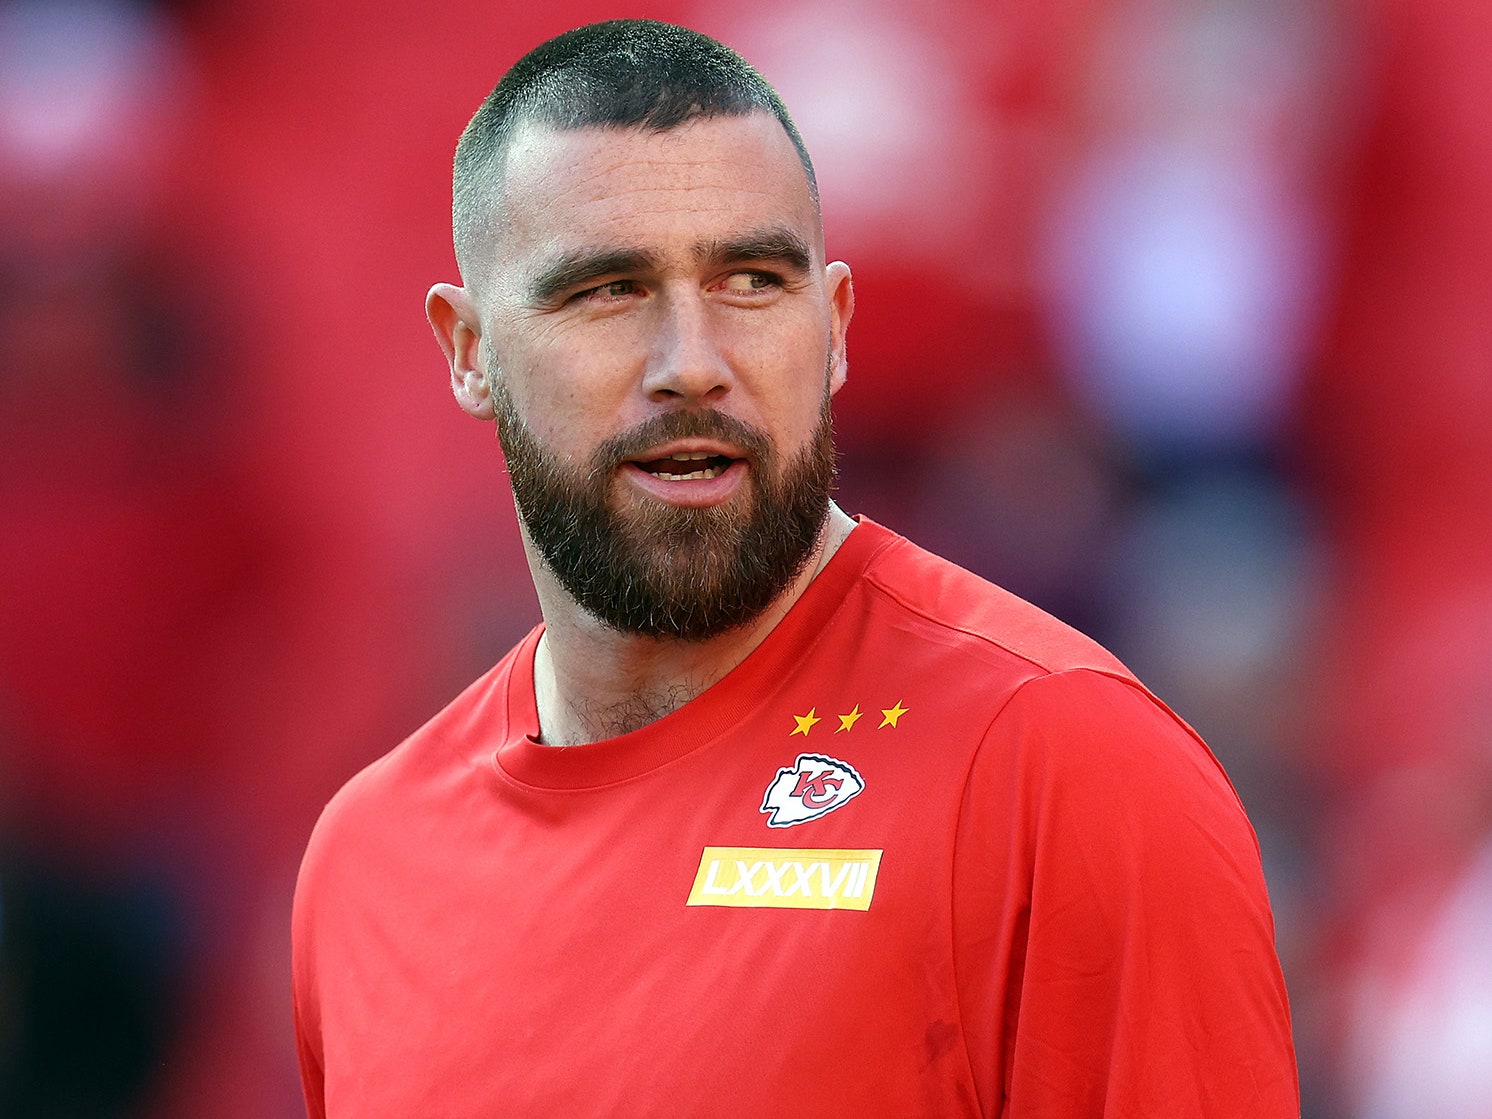 Travis Kelce, Despite “Trying to Keep It Cool,” Can’t Help Gushing About “Amazing” Taylor Swift